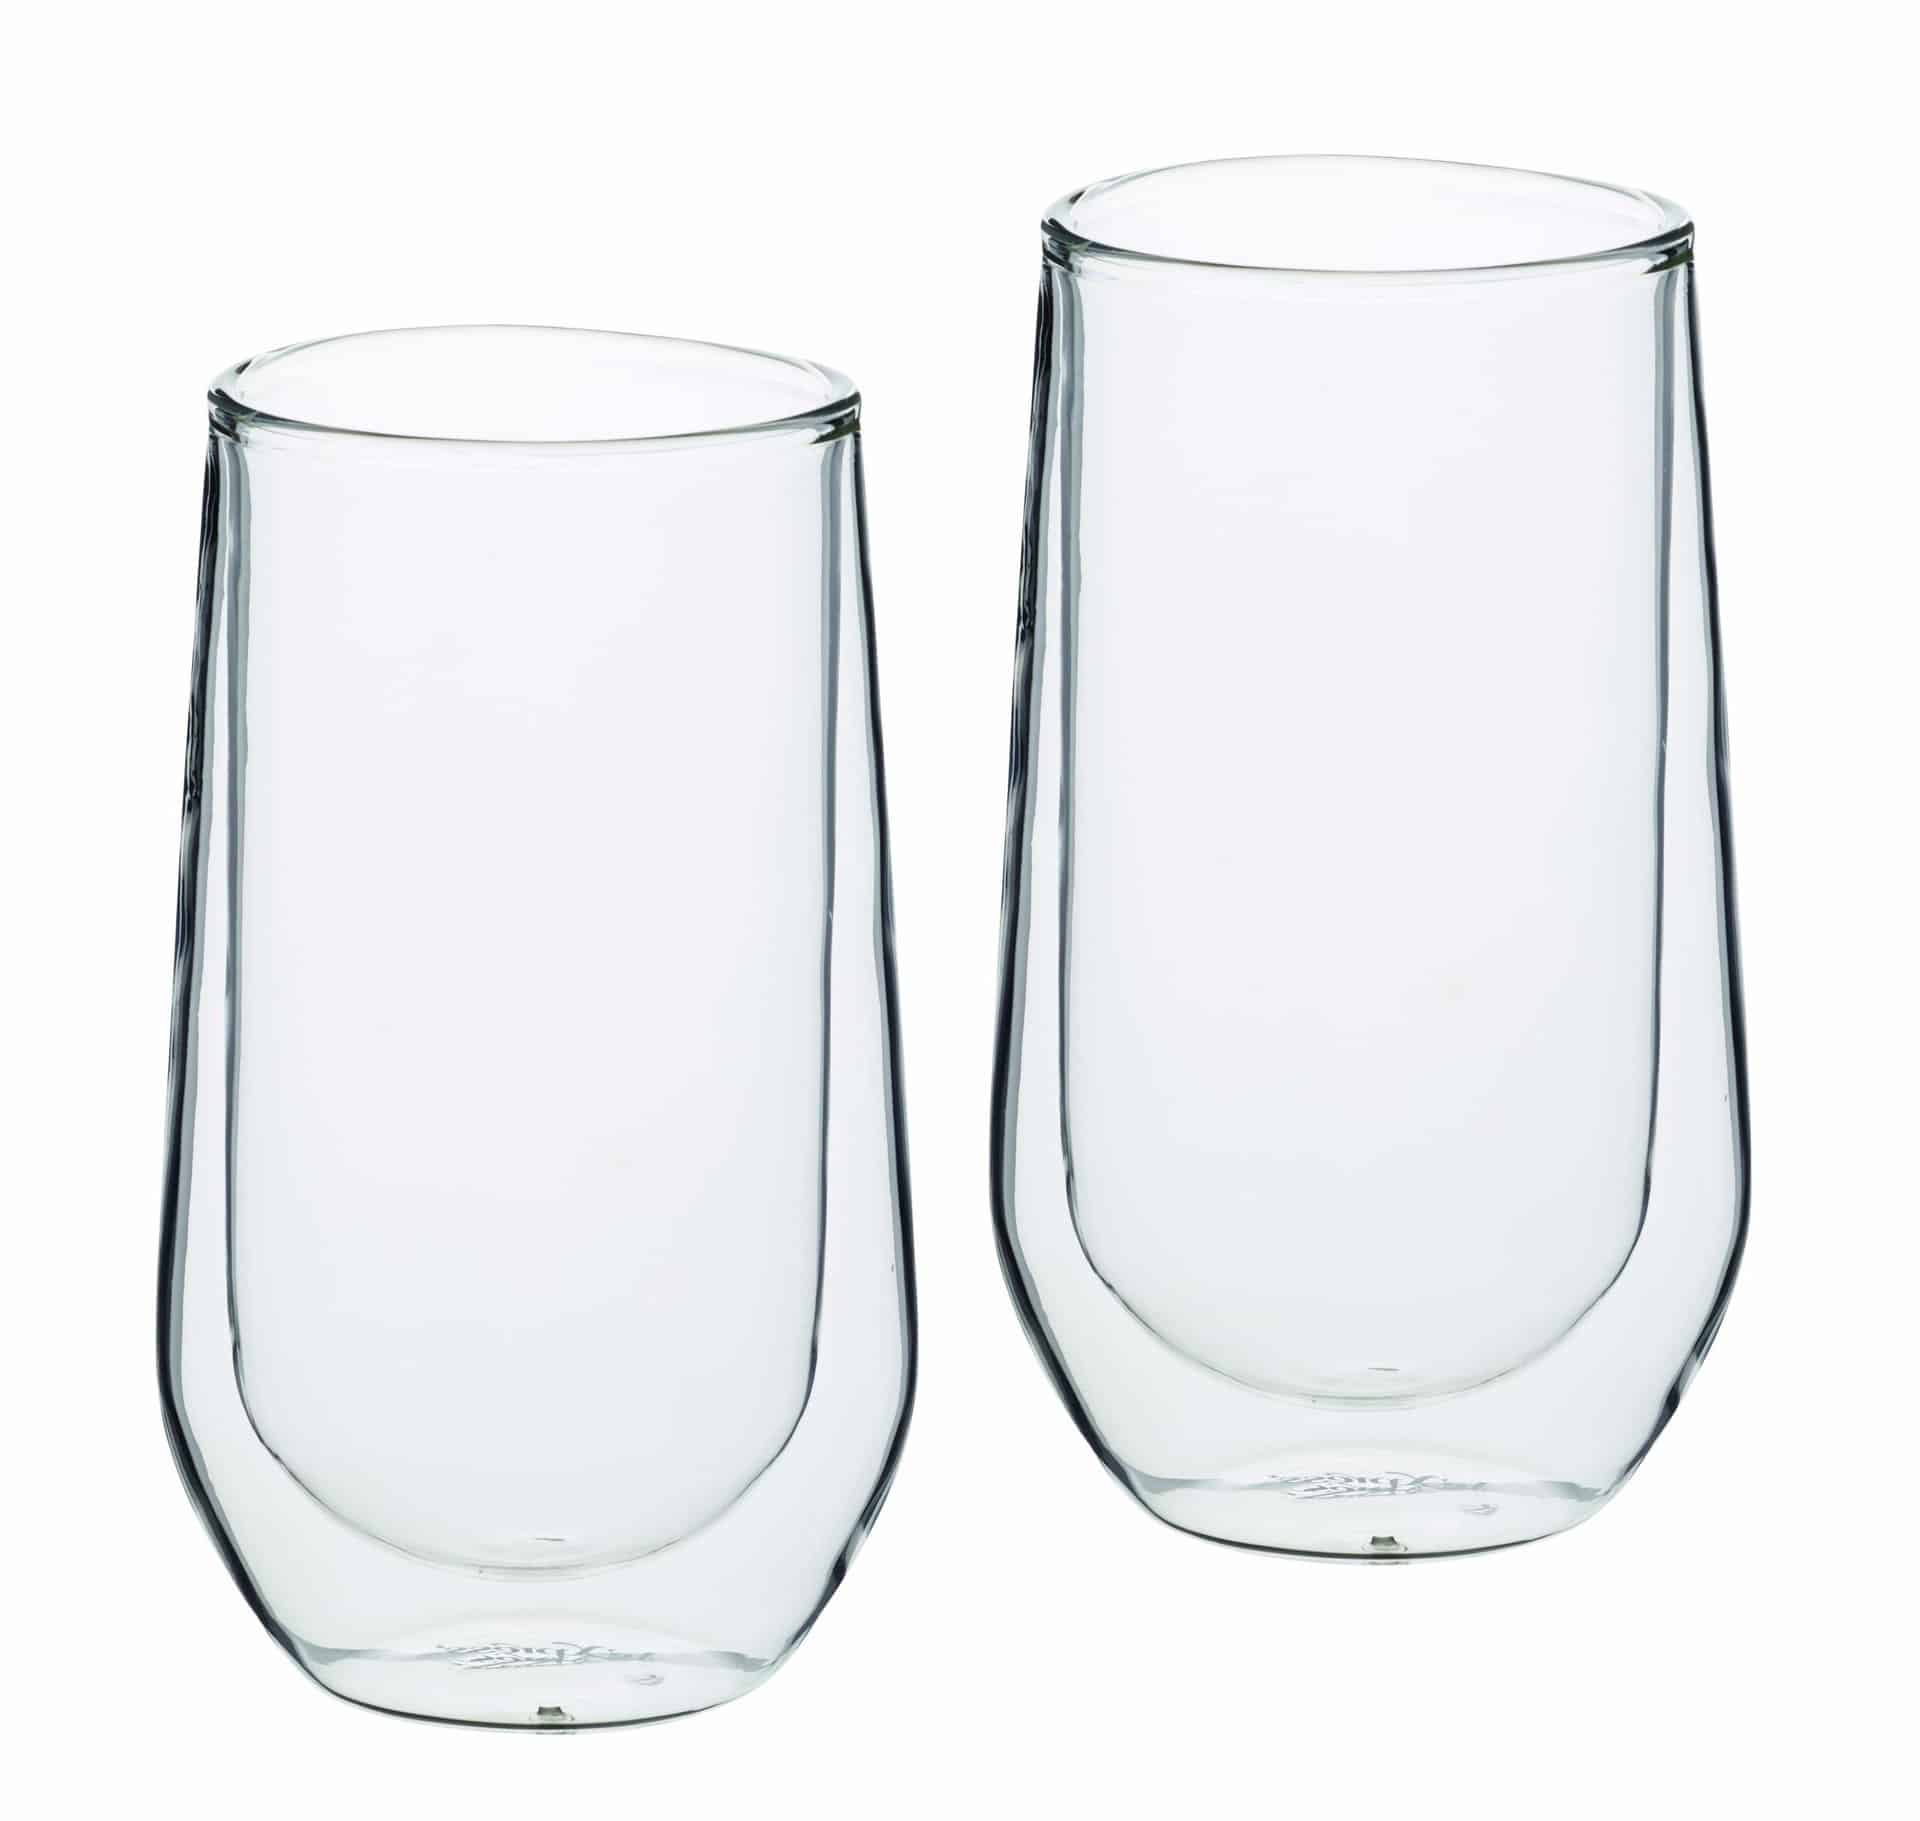 Double Wall HighBall Glass Le'Xpress KitchenCraft